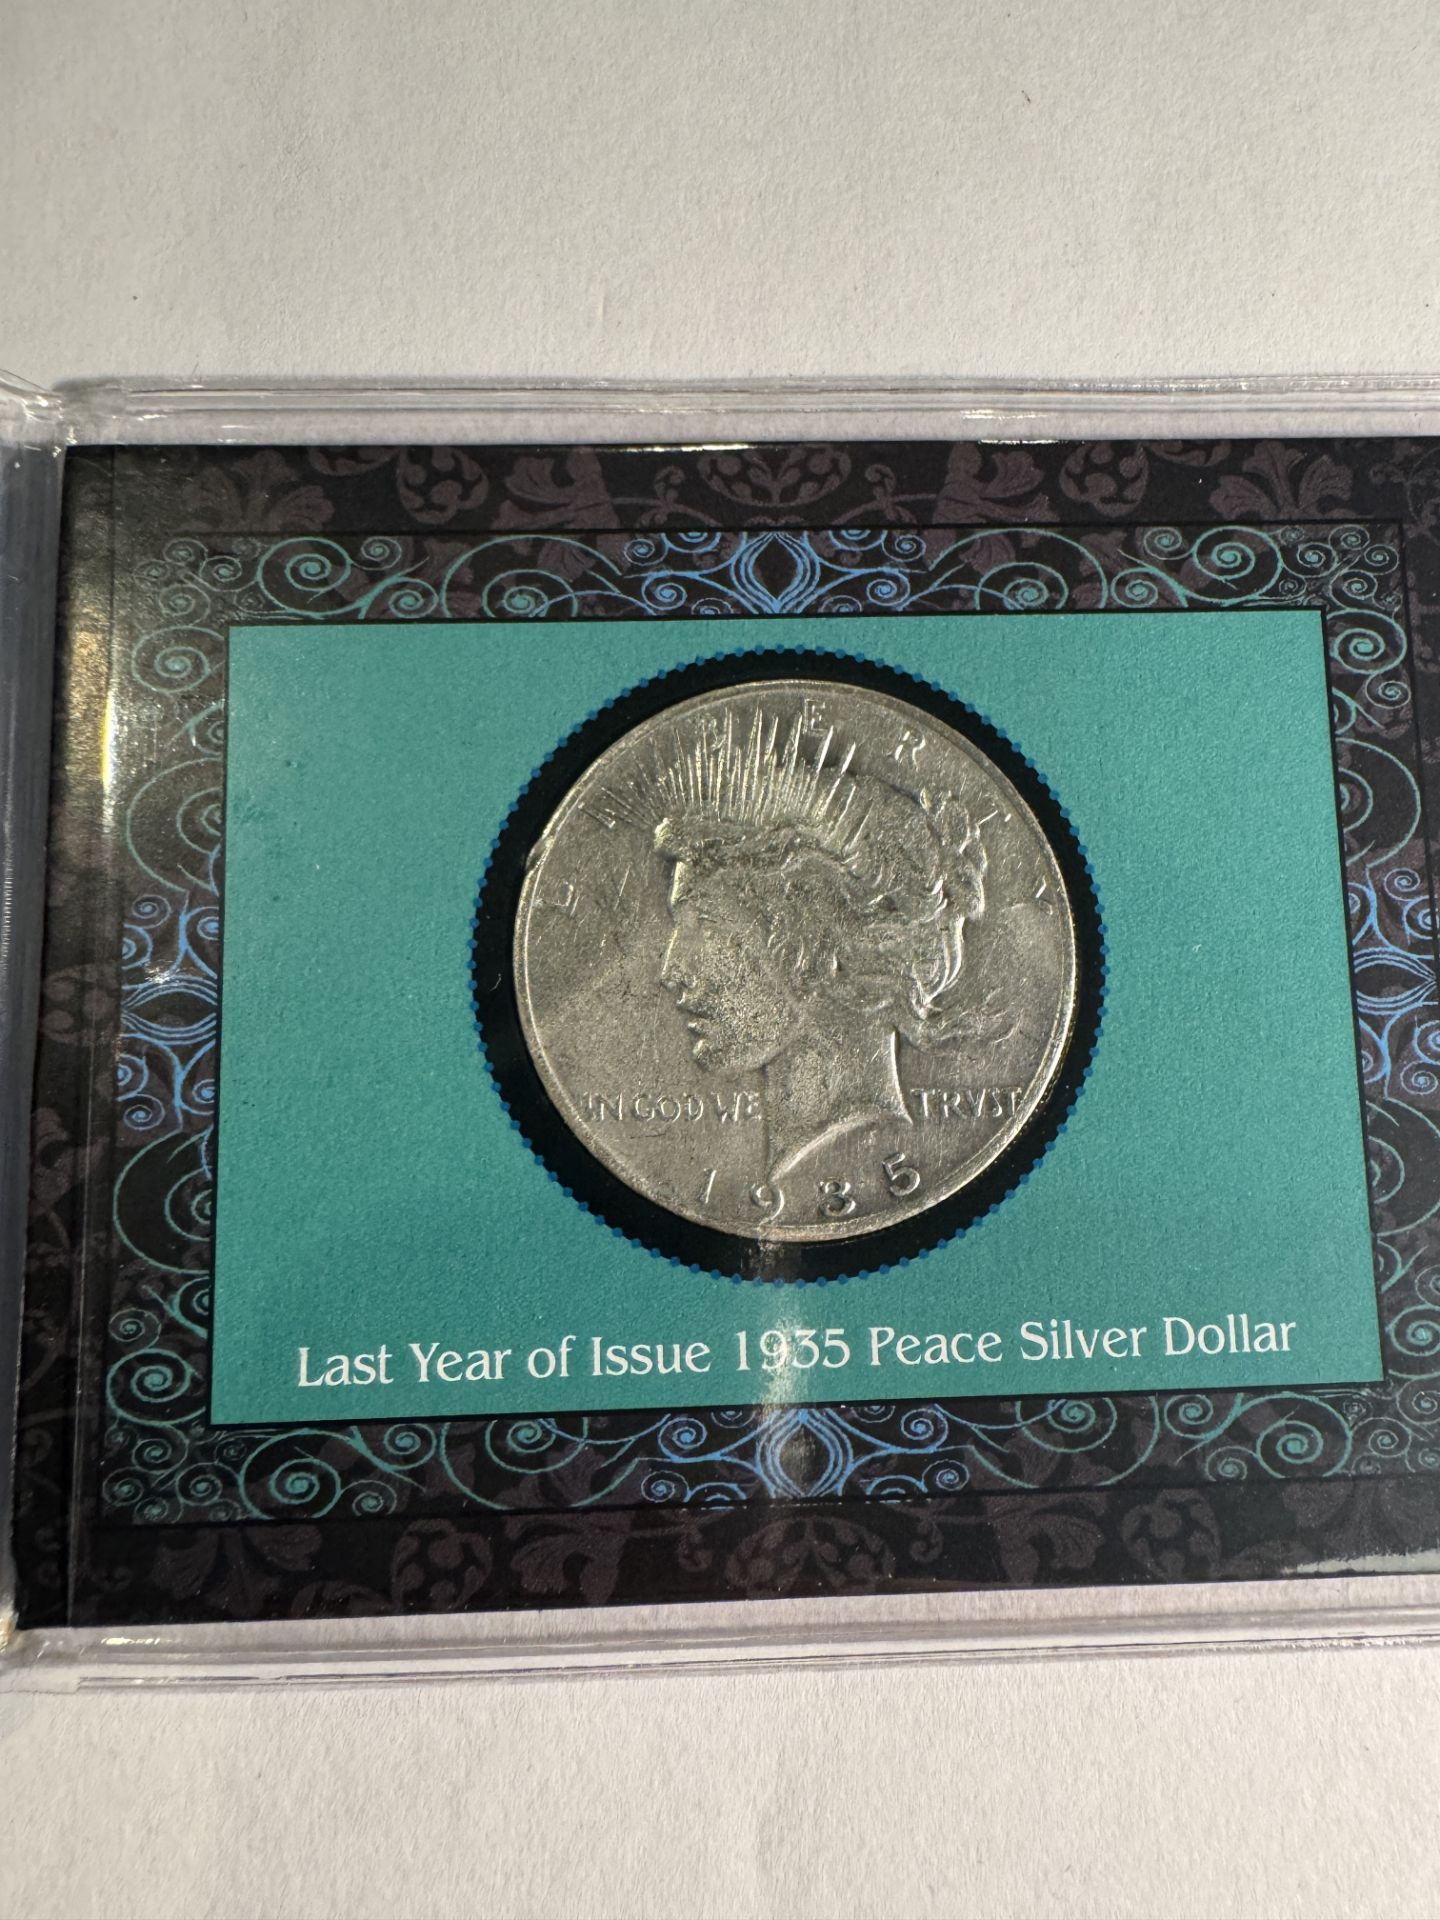 1935 PEACE SILVER DOLLAR - Image 2 of 3